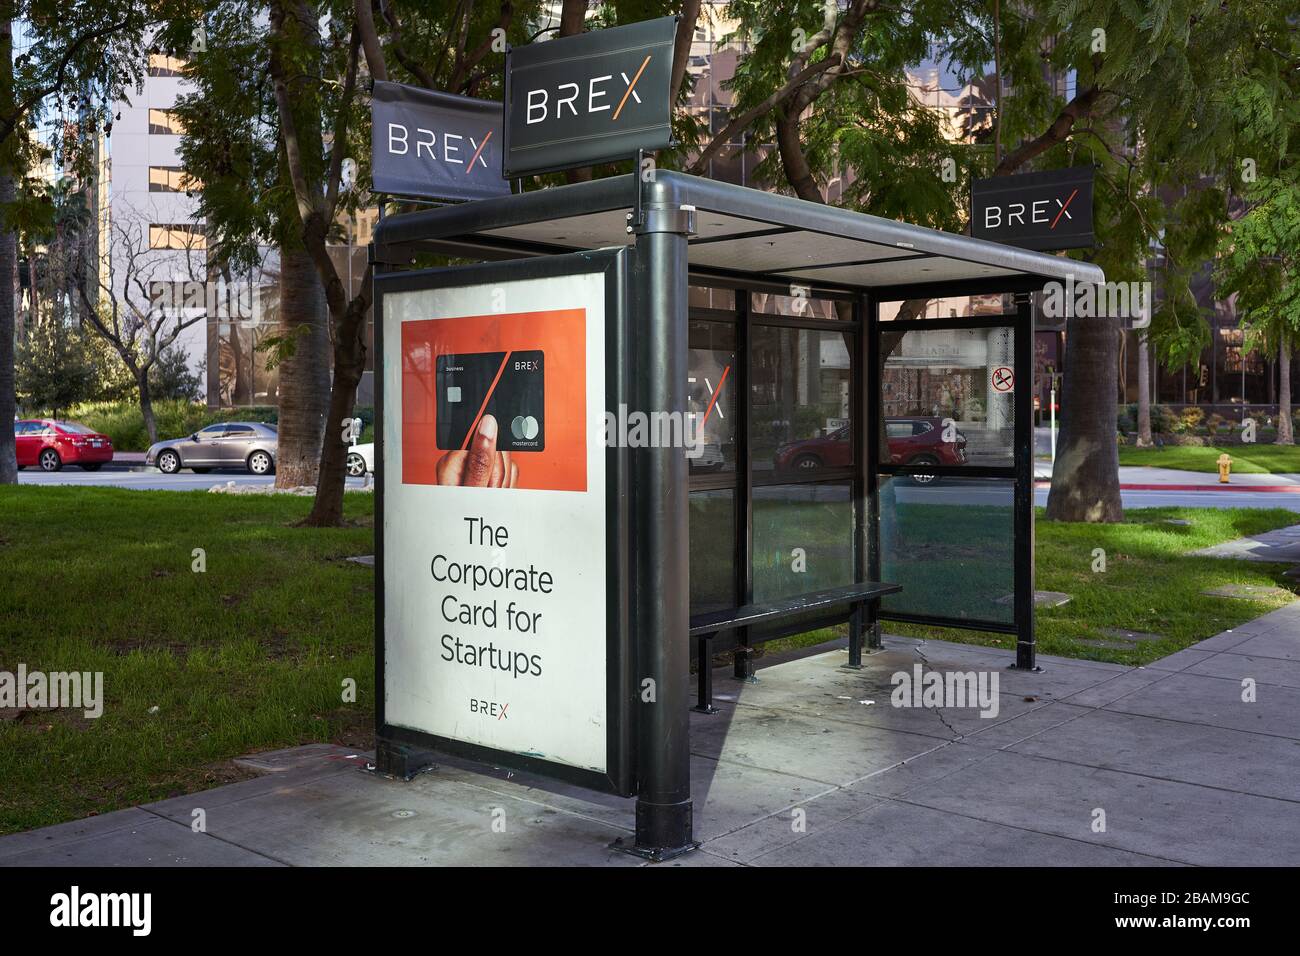 American financial service and technology company Brex, Inc.'s advertisement seen at a bus stop in downtown San Jose, California, on Feb 17, 2020. Stock Photo